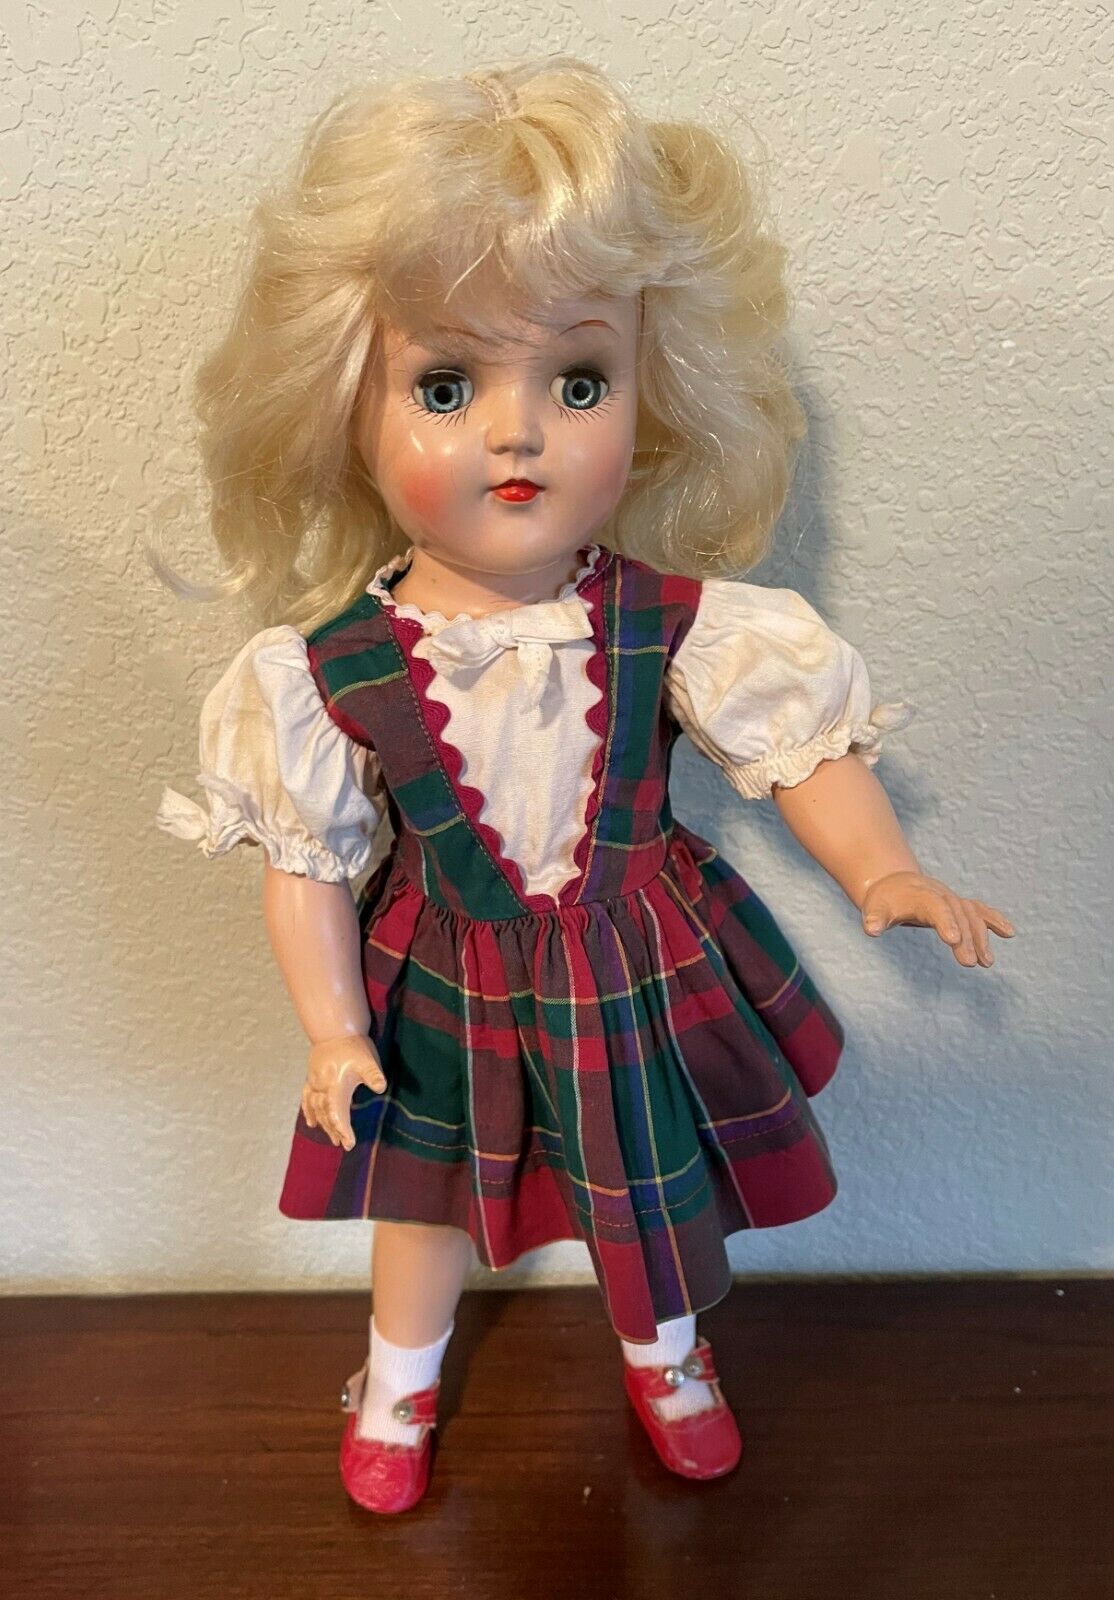 Vintage Blond Ideal Toni Doll P-91 16 Inches Tall